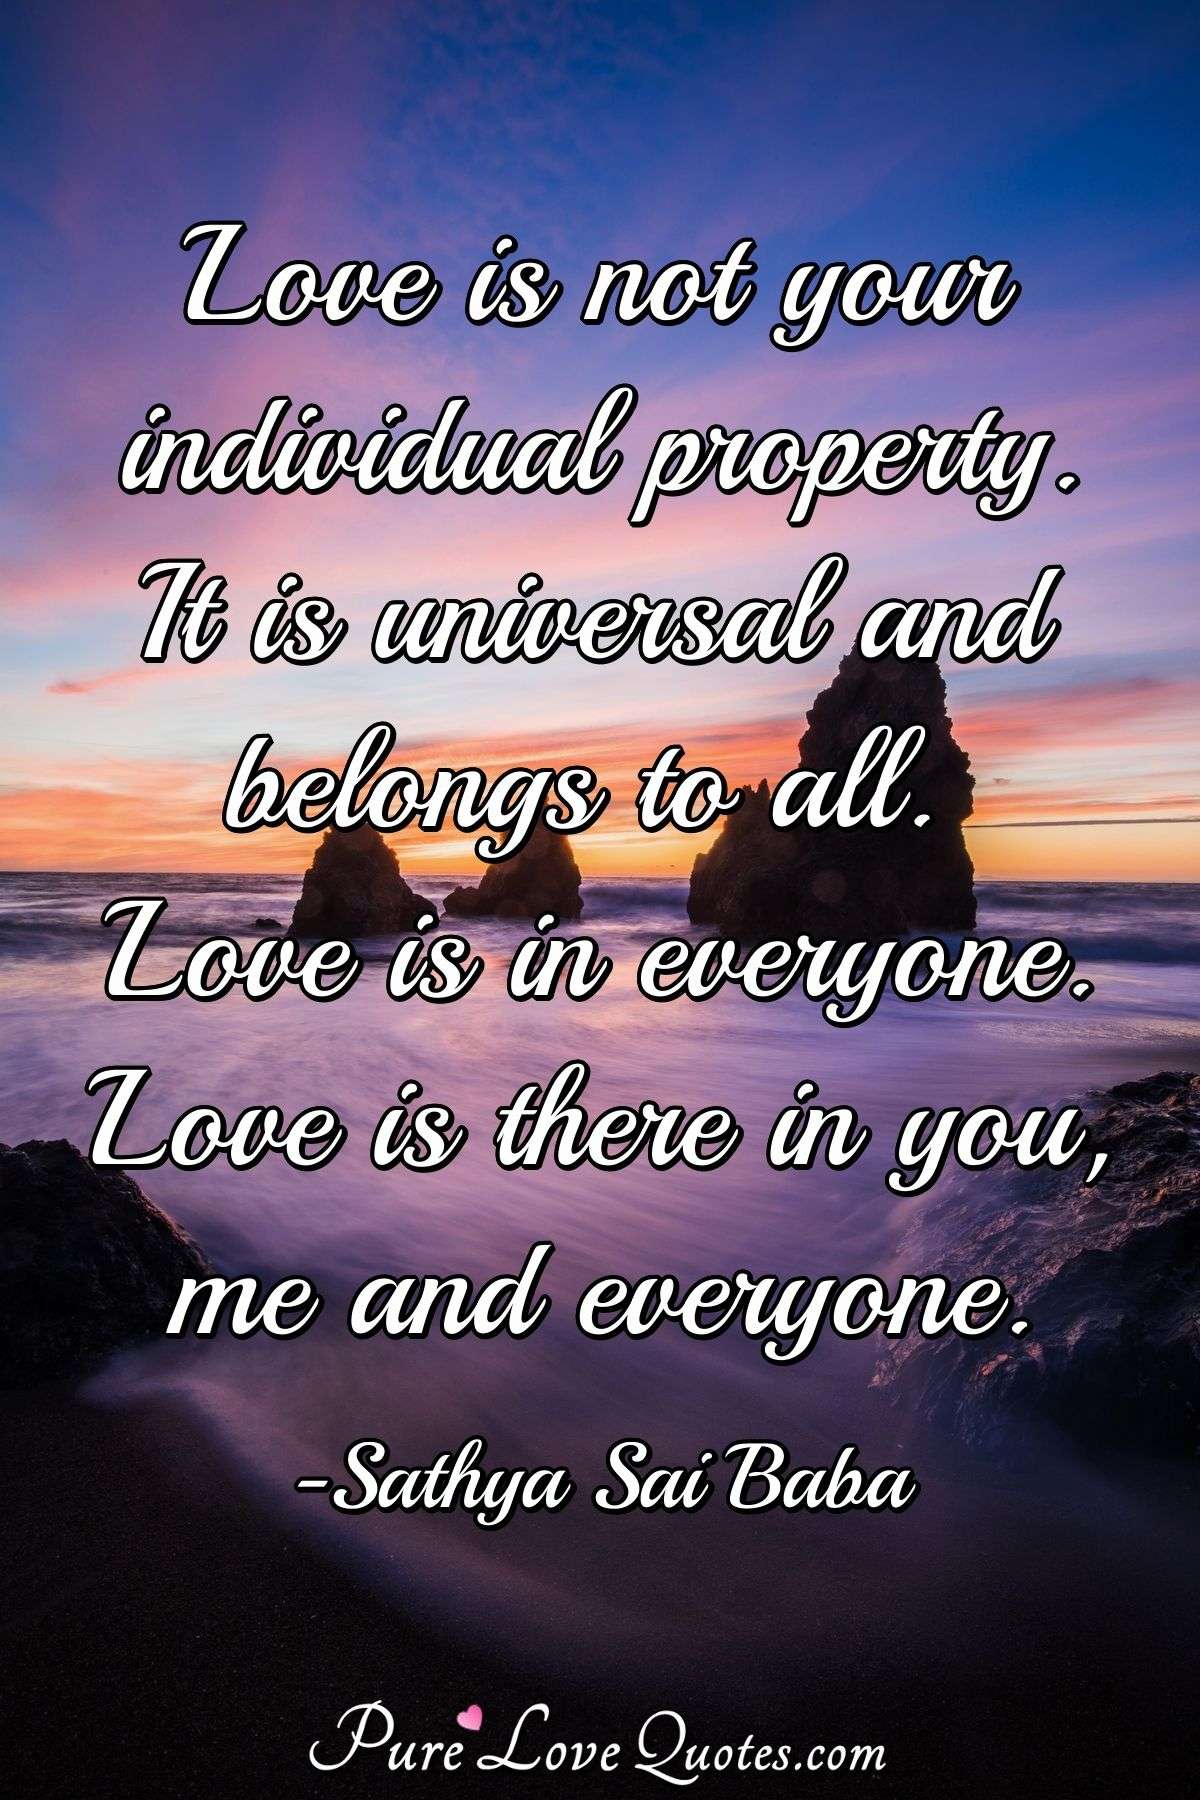 Love is not your individual property. It is universal and belongs to all. Love is in everyone. Love is there in you, me and everyone. - Sathya Sai Baba